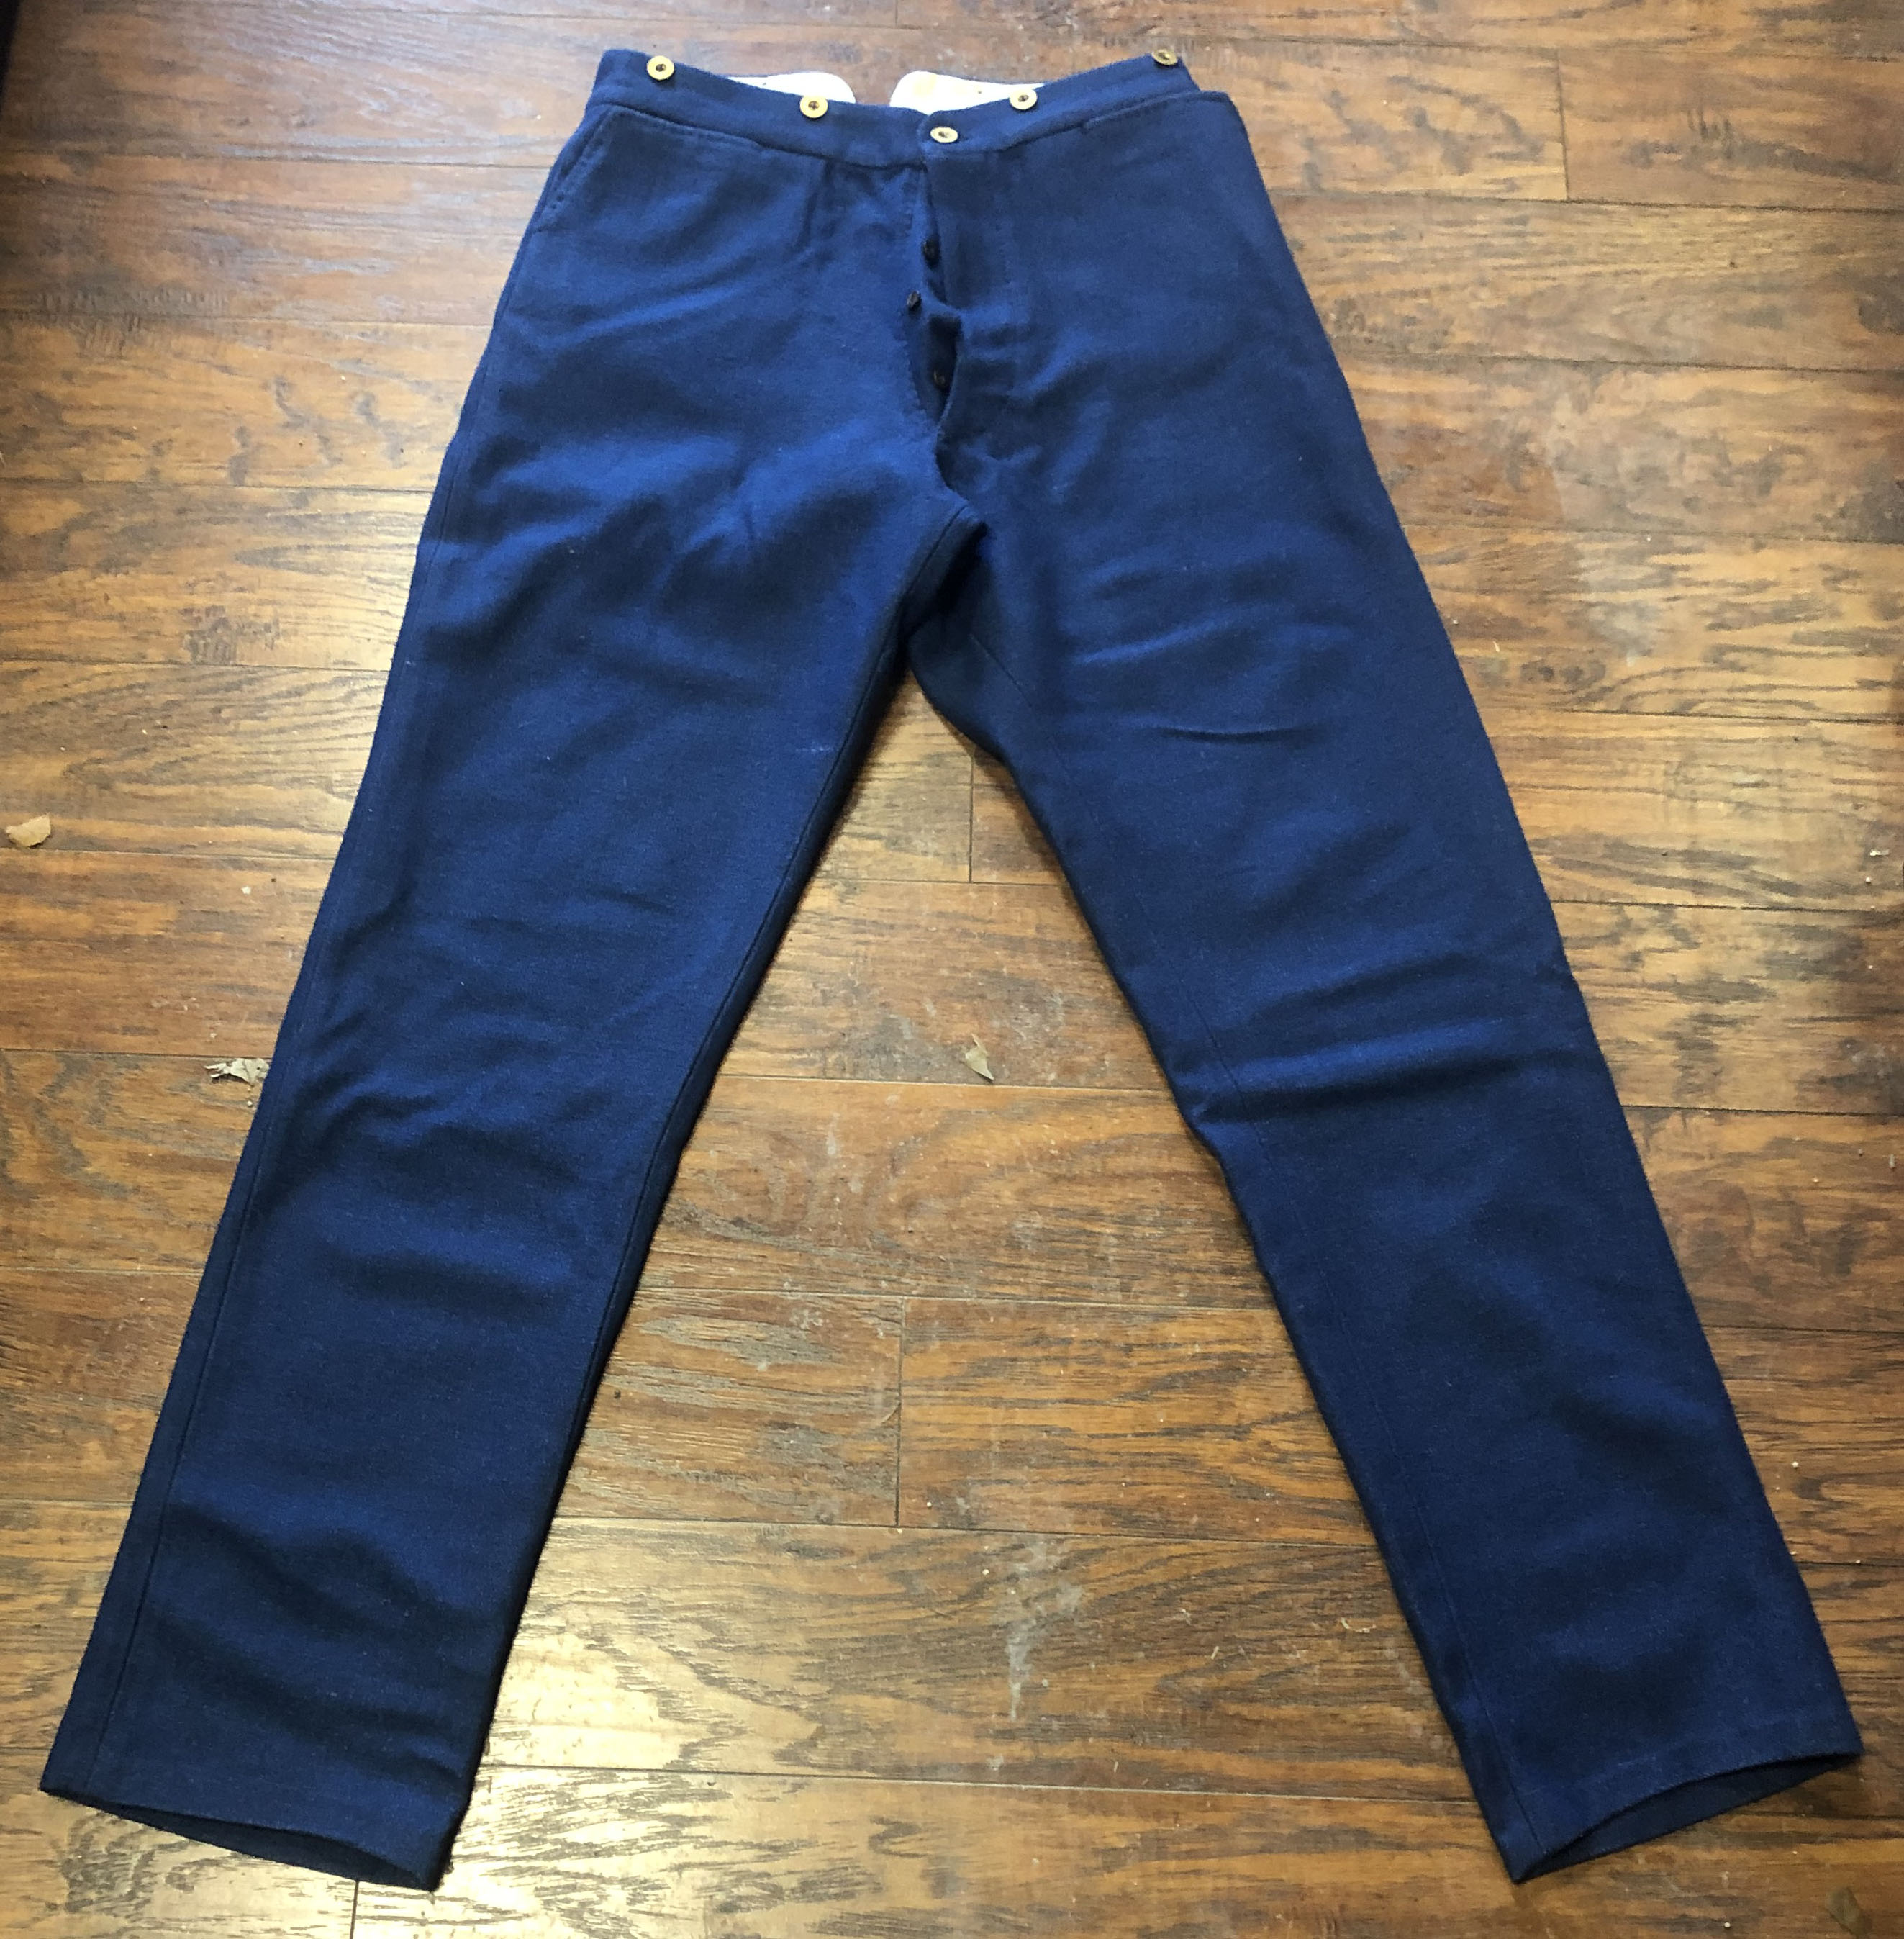 Non Stock British Import trousers in Royal Blue Satinette